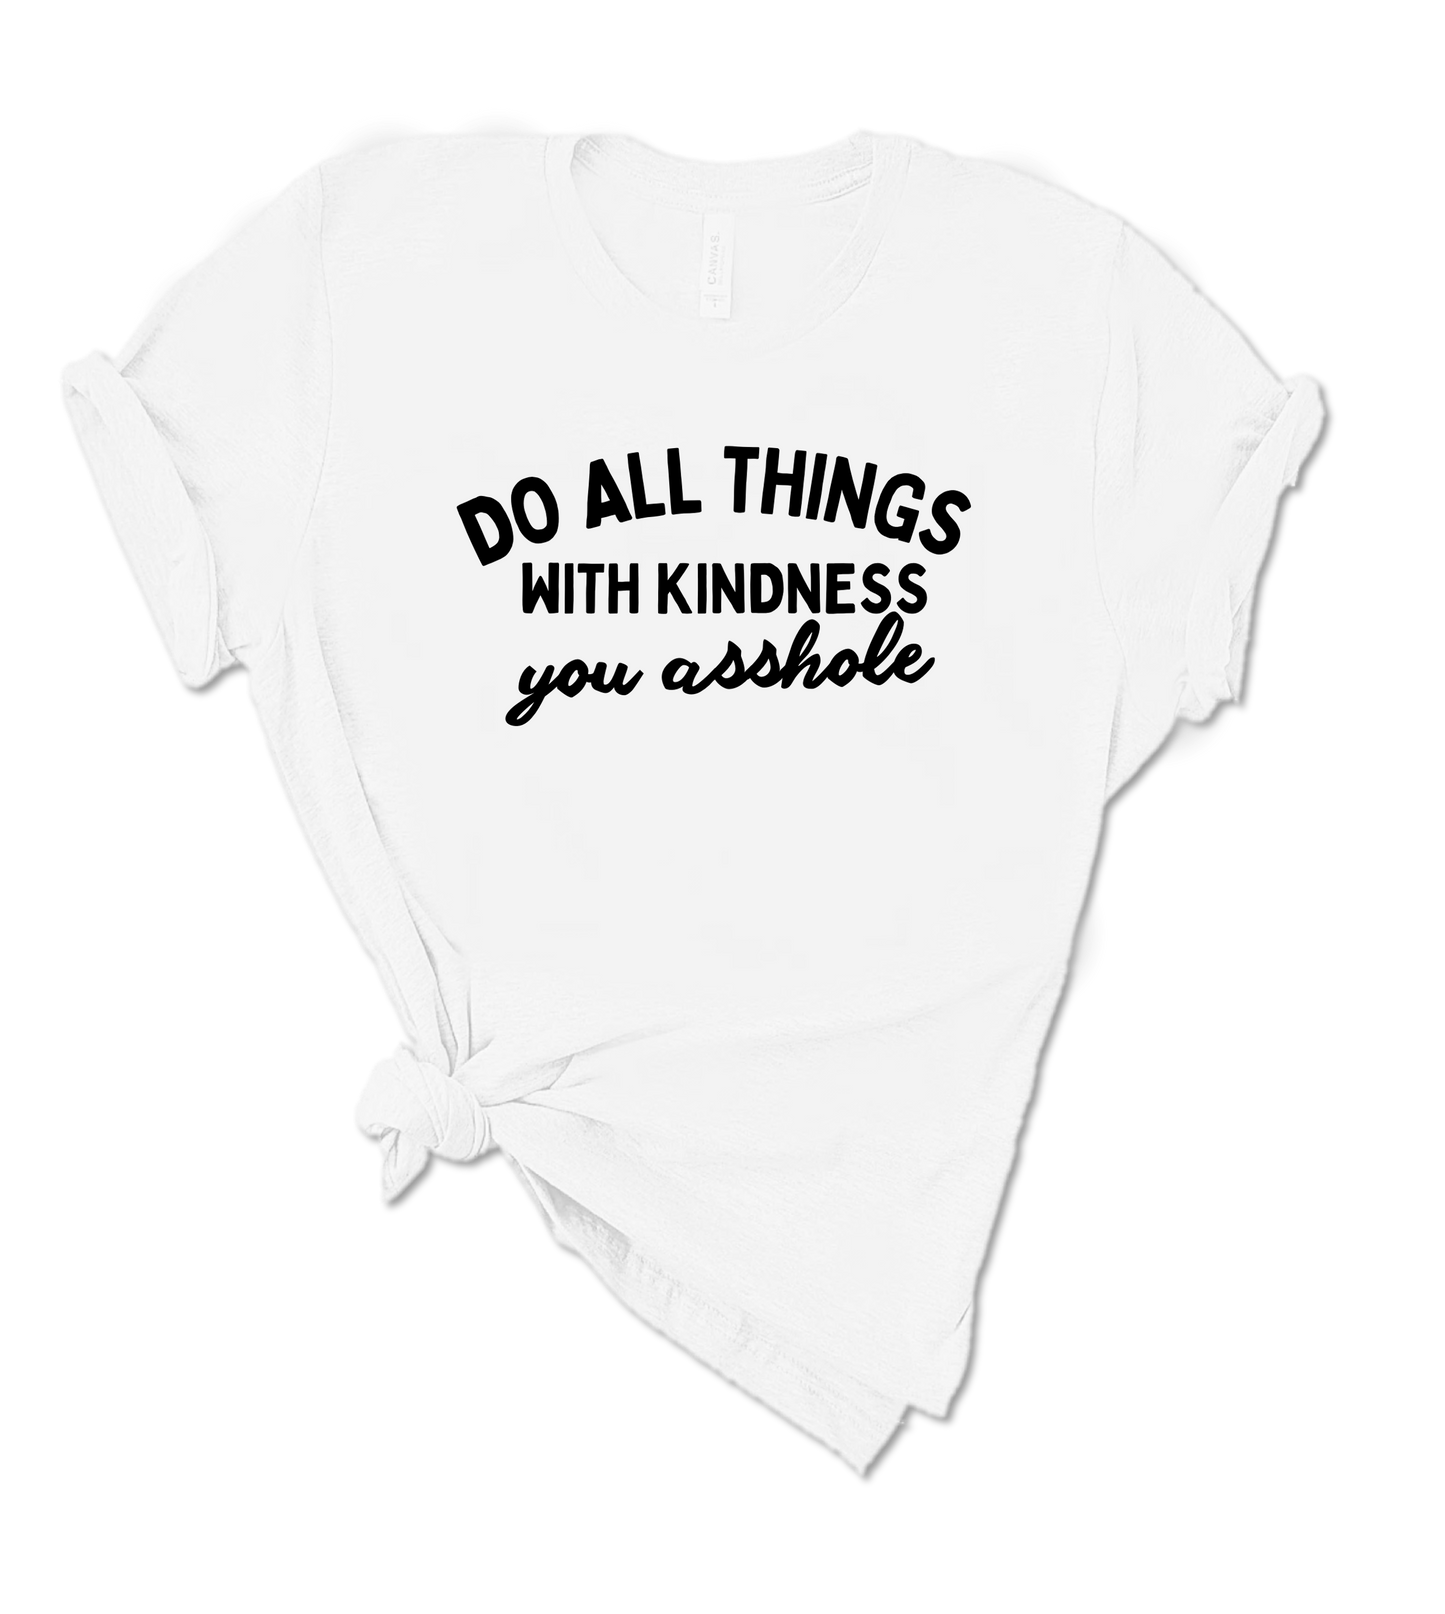 DO ALL THING WITH KINDNESS..